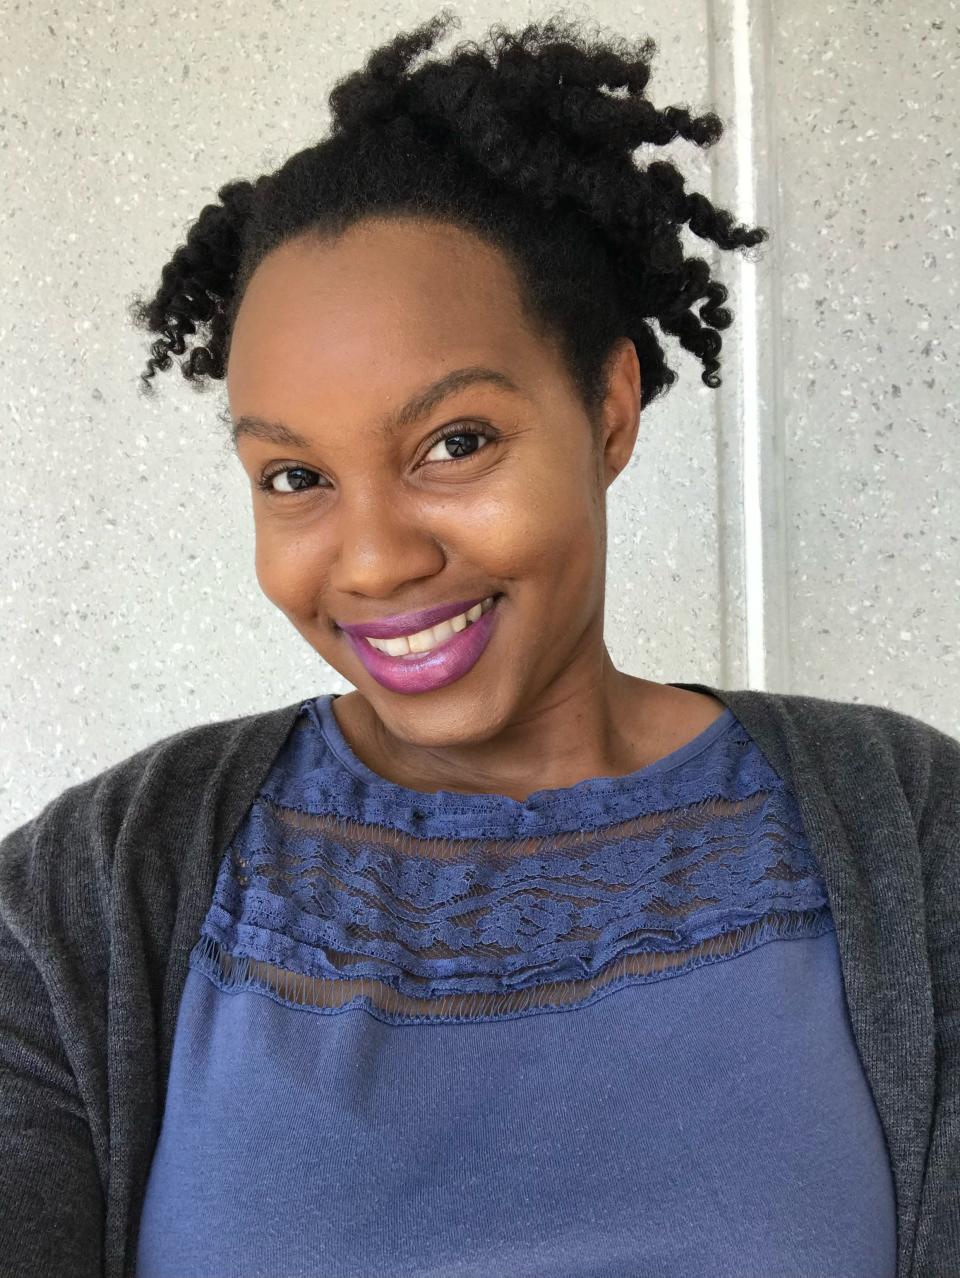 Raisa Habersham is an investigative reporter for The Savannah Morning News. Starting Oct. 10, she will be an accountability reporter for The Miami Herald.